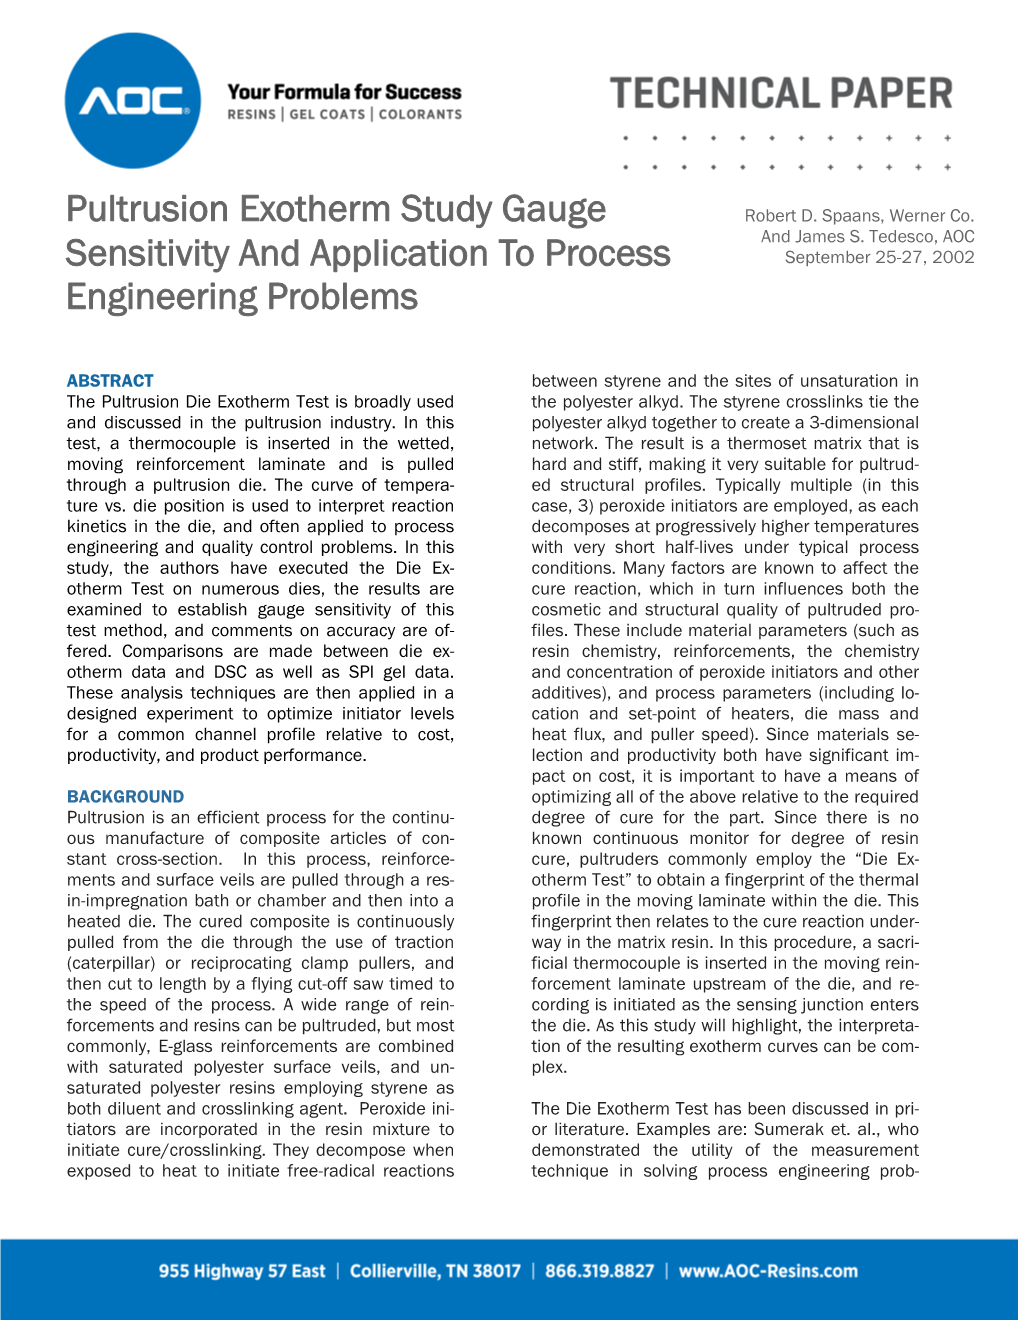 Pultrusion Exotherm Study Gauge Sensitivity and Application To